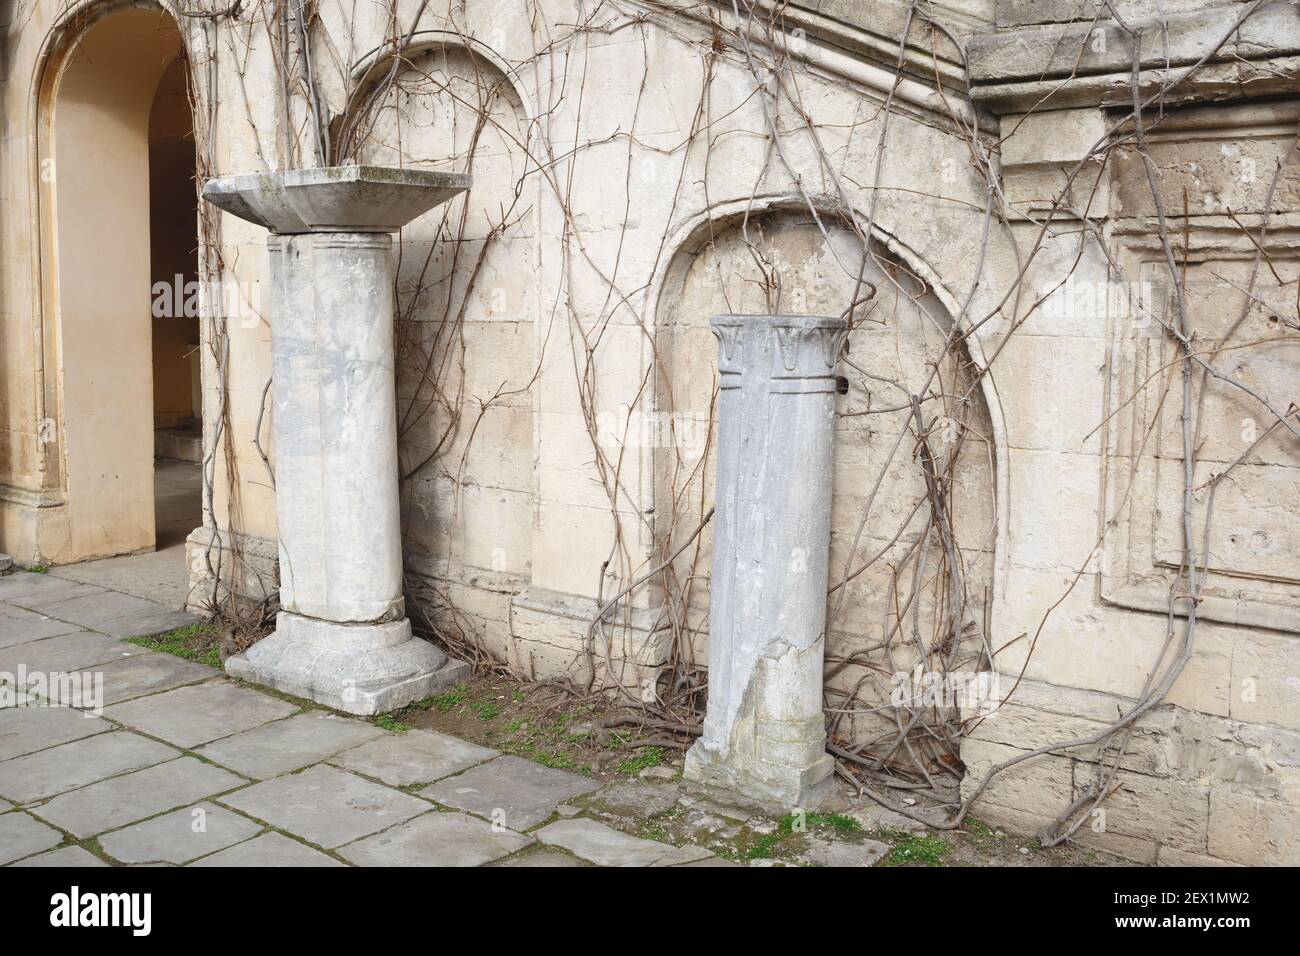 ancient greek building with antique columns and arched windows Stock Photo